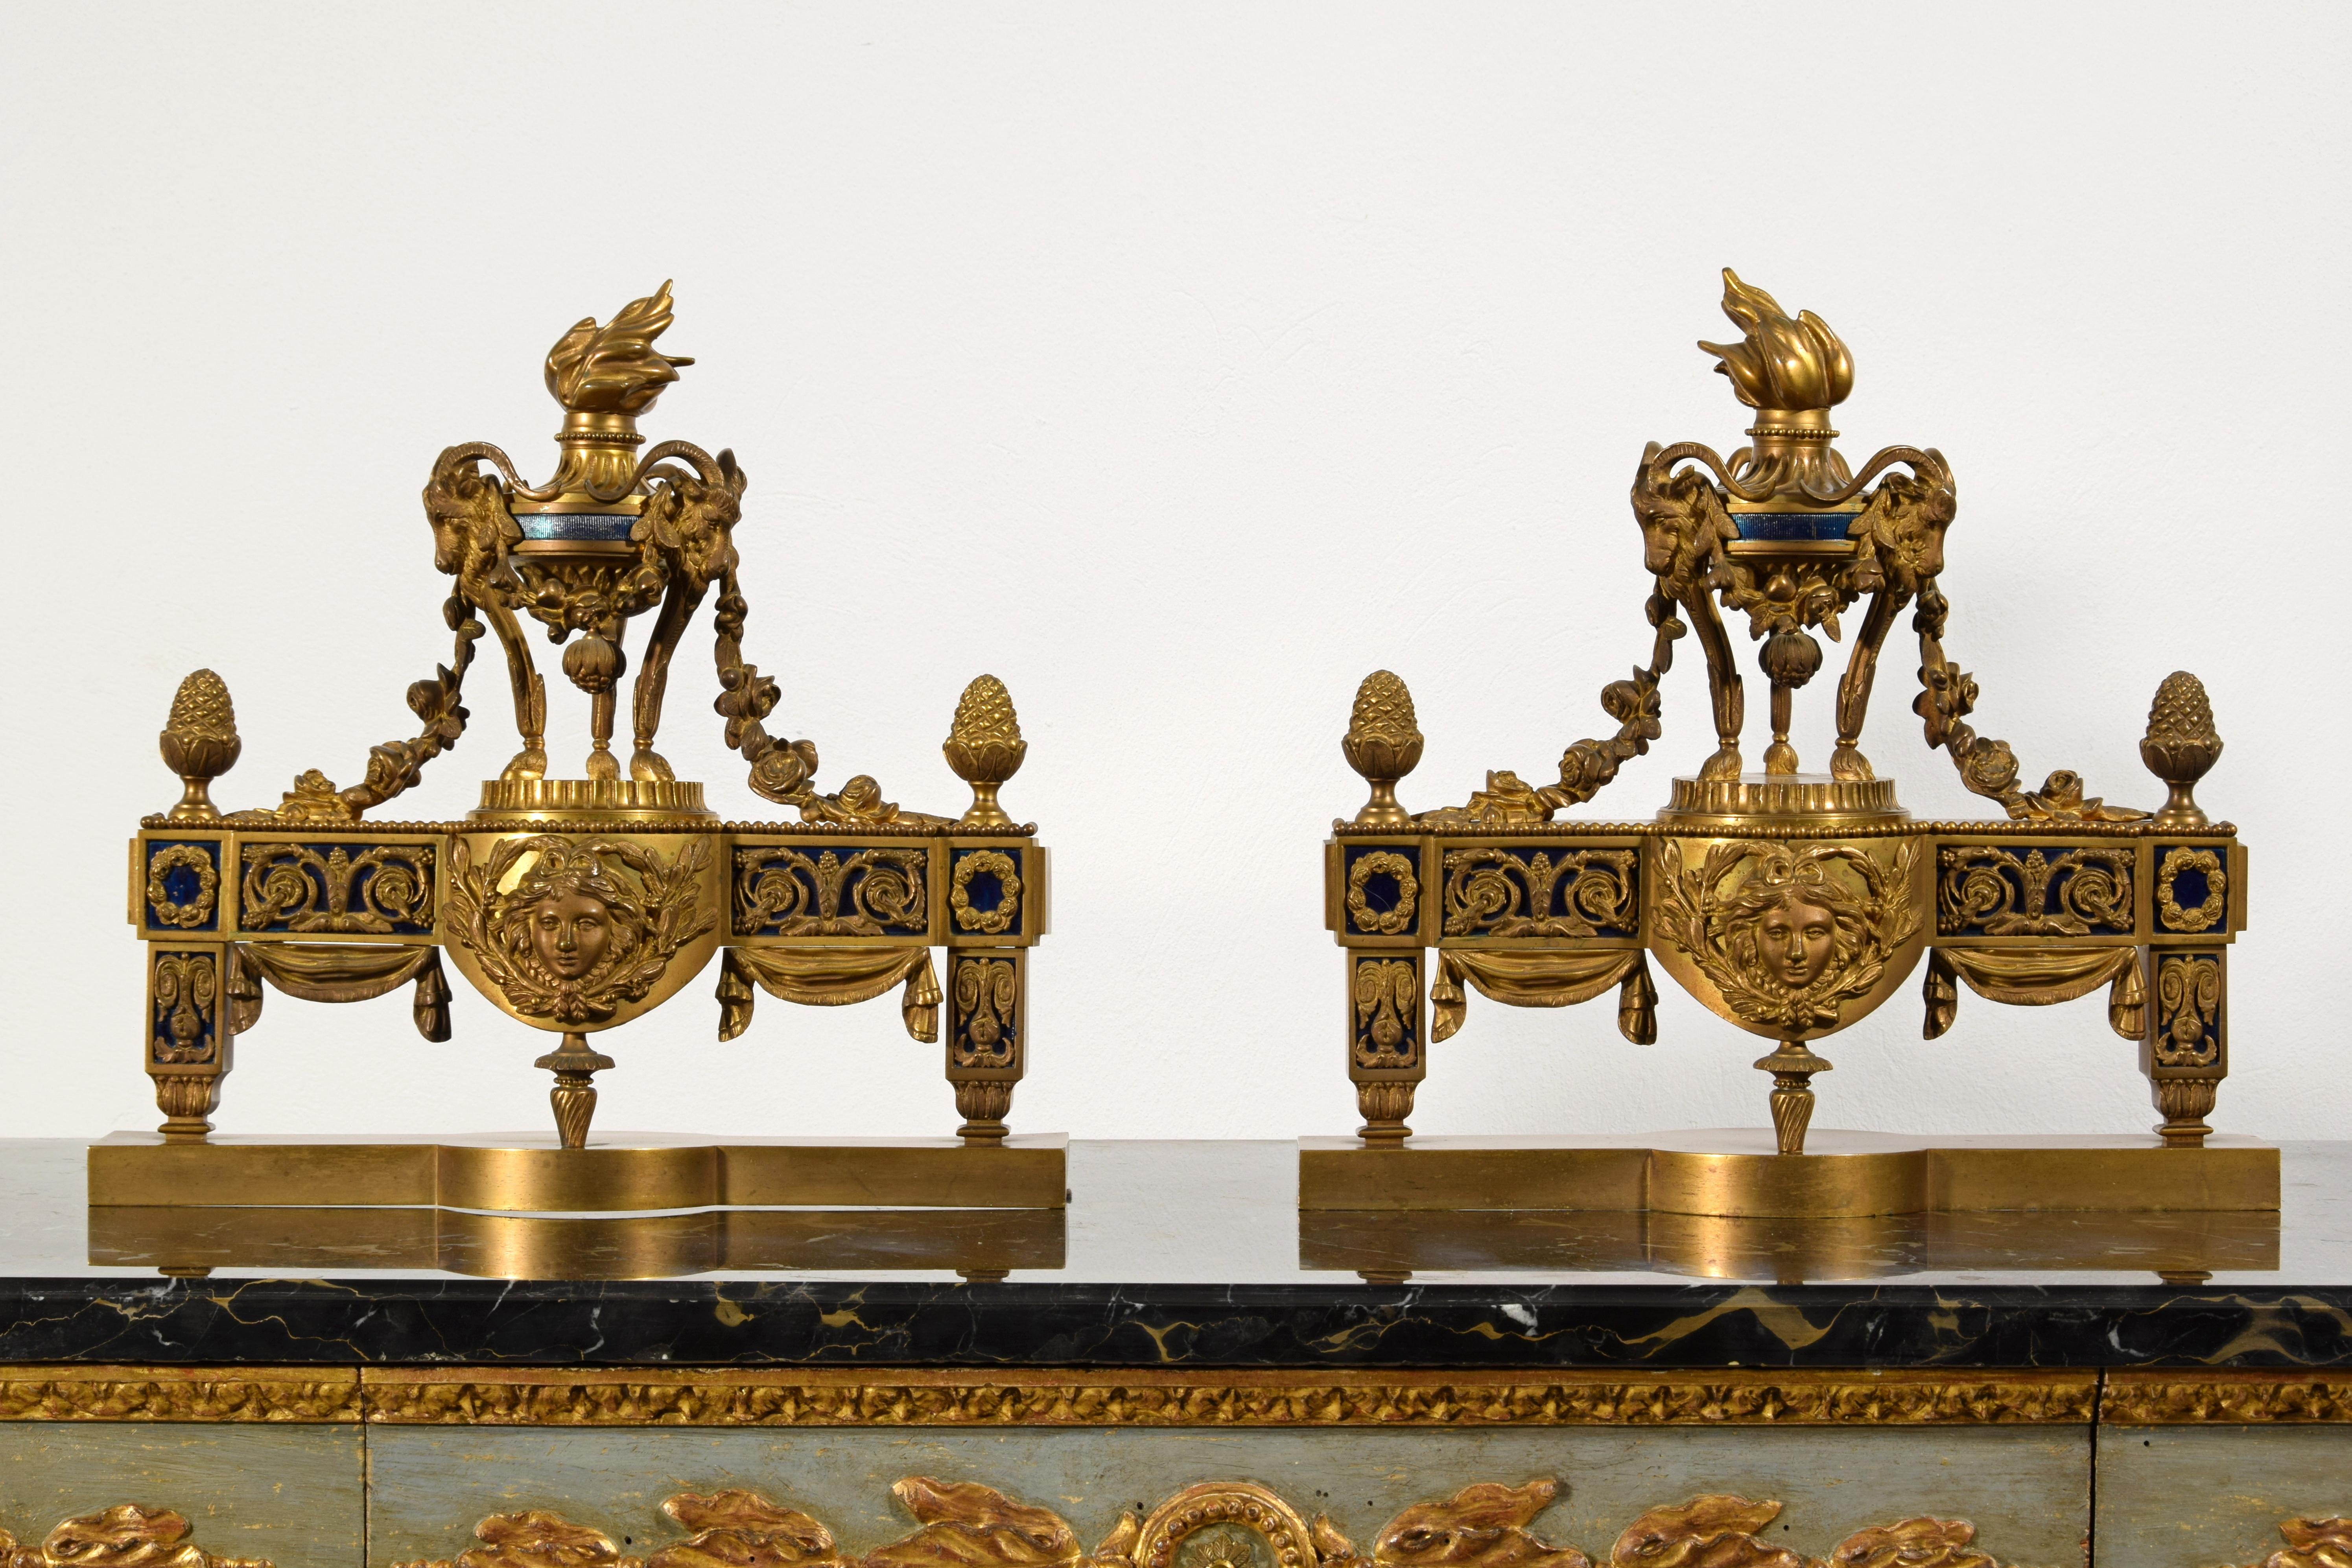 19th Century, pair of French gilt bronze fireplace chenets.

This valuable pair of Fireplace Chenets was made in France in the early nineteenth century. The Fireplace Chenets are in finely chiselled and gilded bronze and have ornate decorations